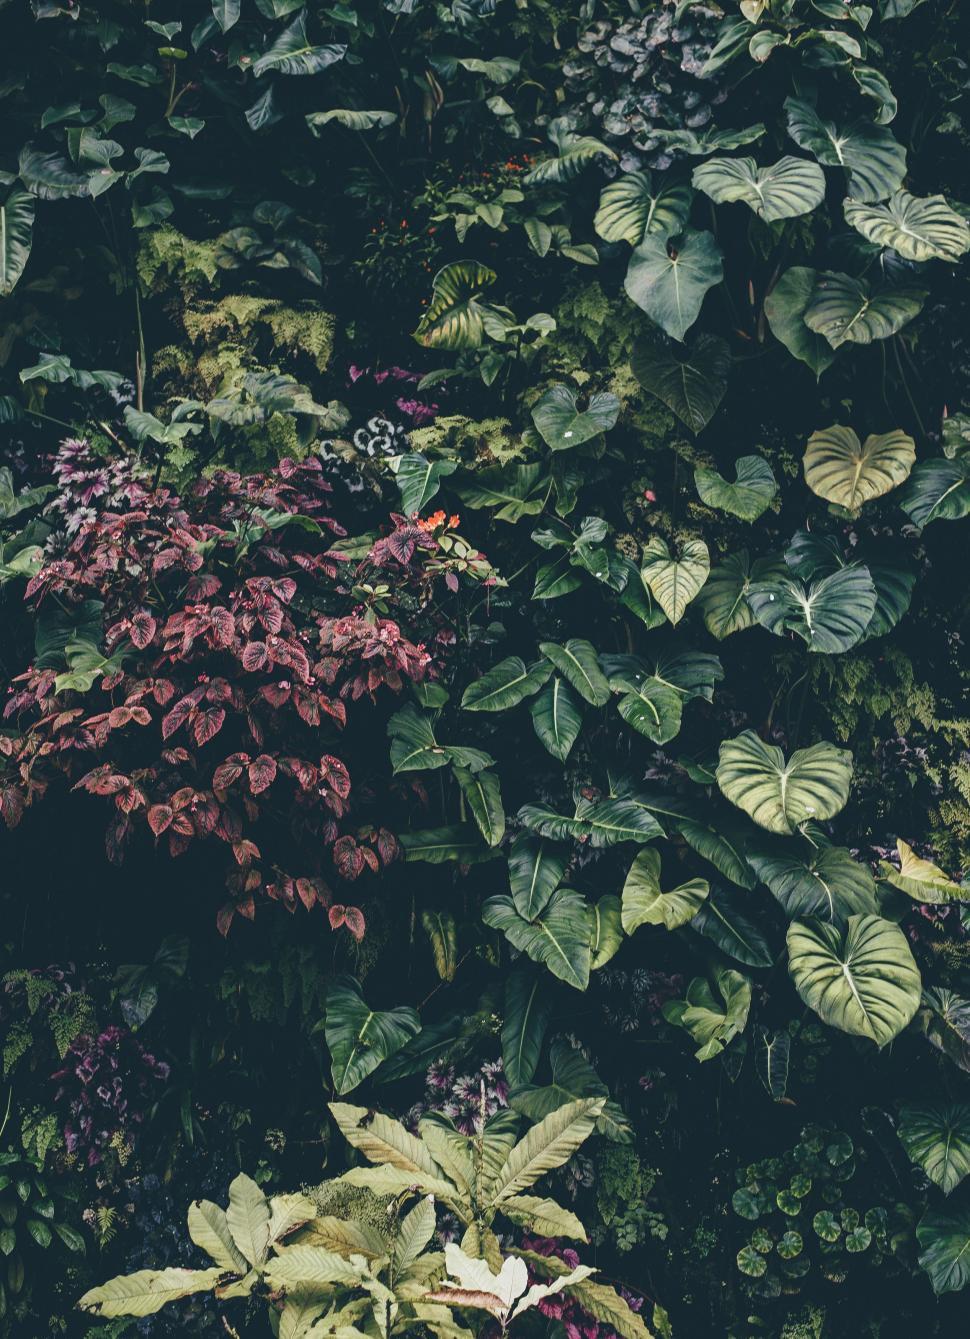 Free Image of Bush of red and green leaves in Garden 